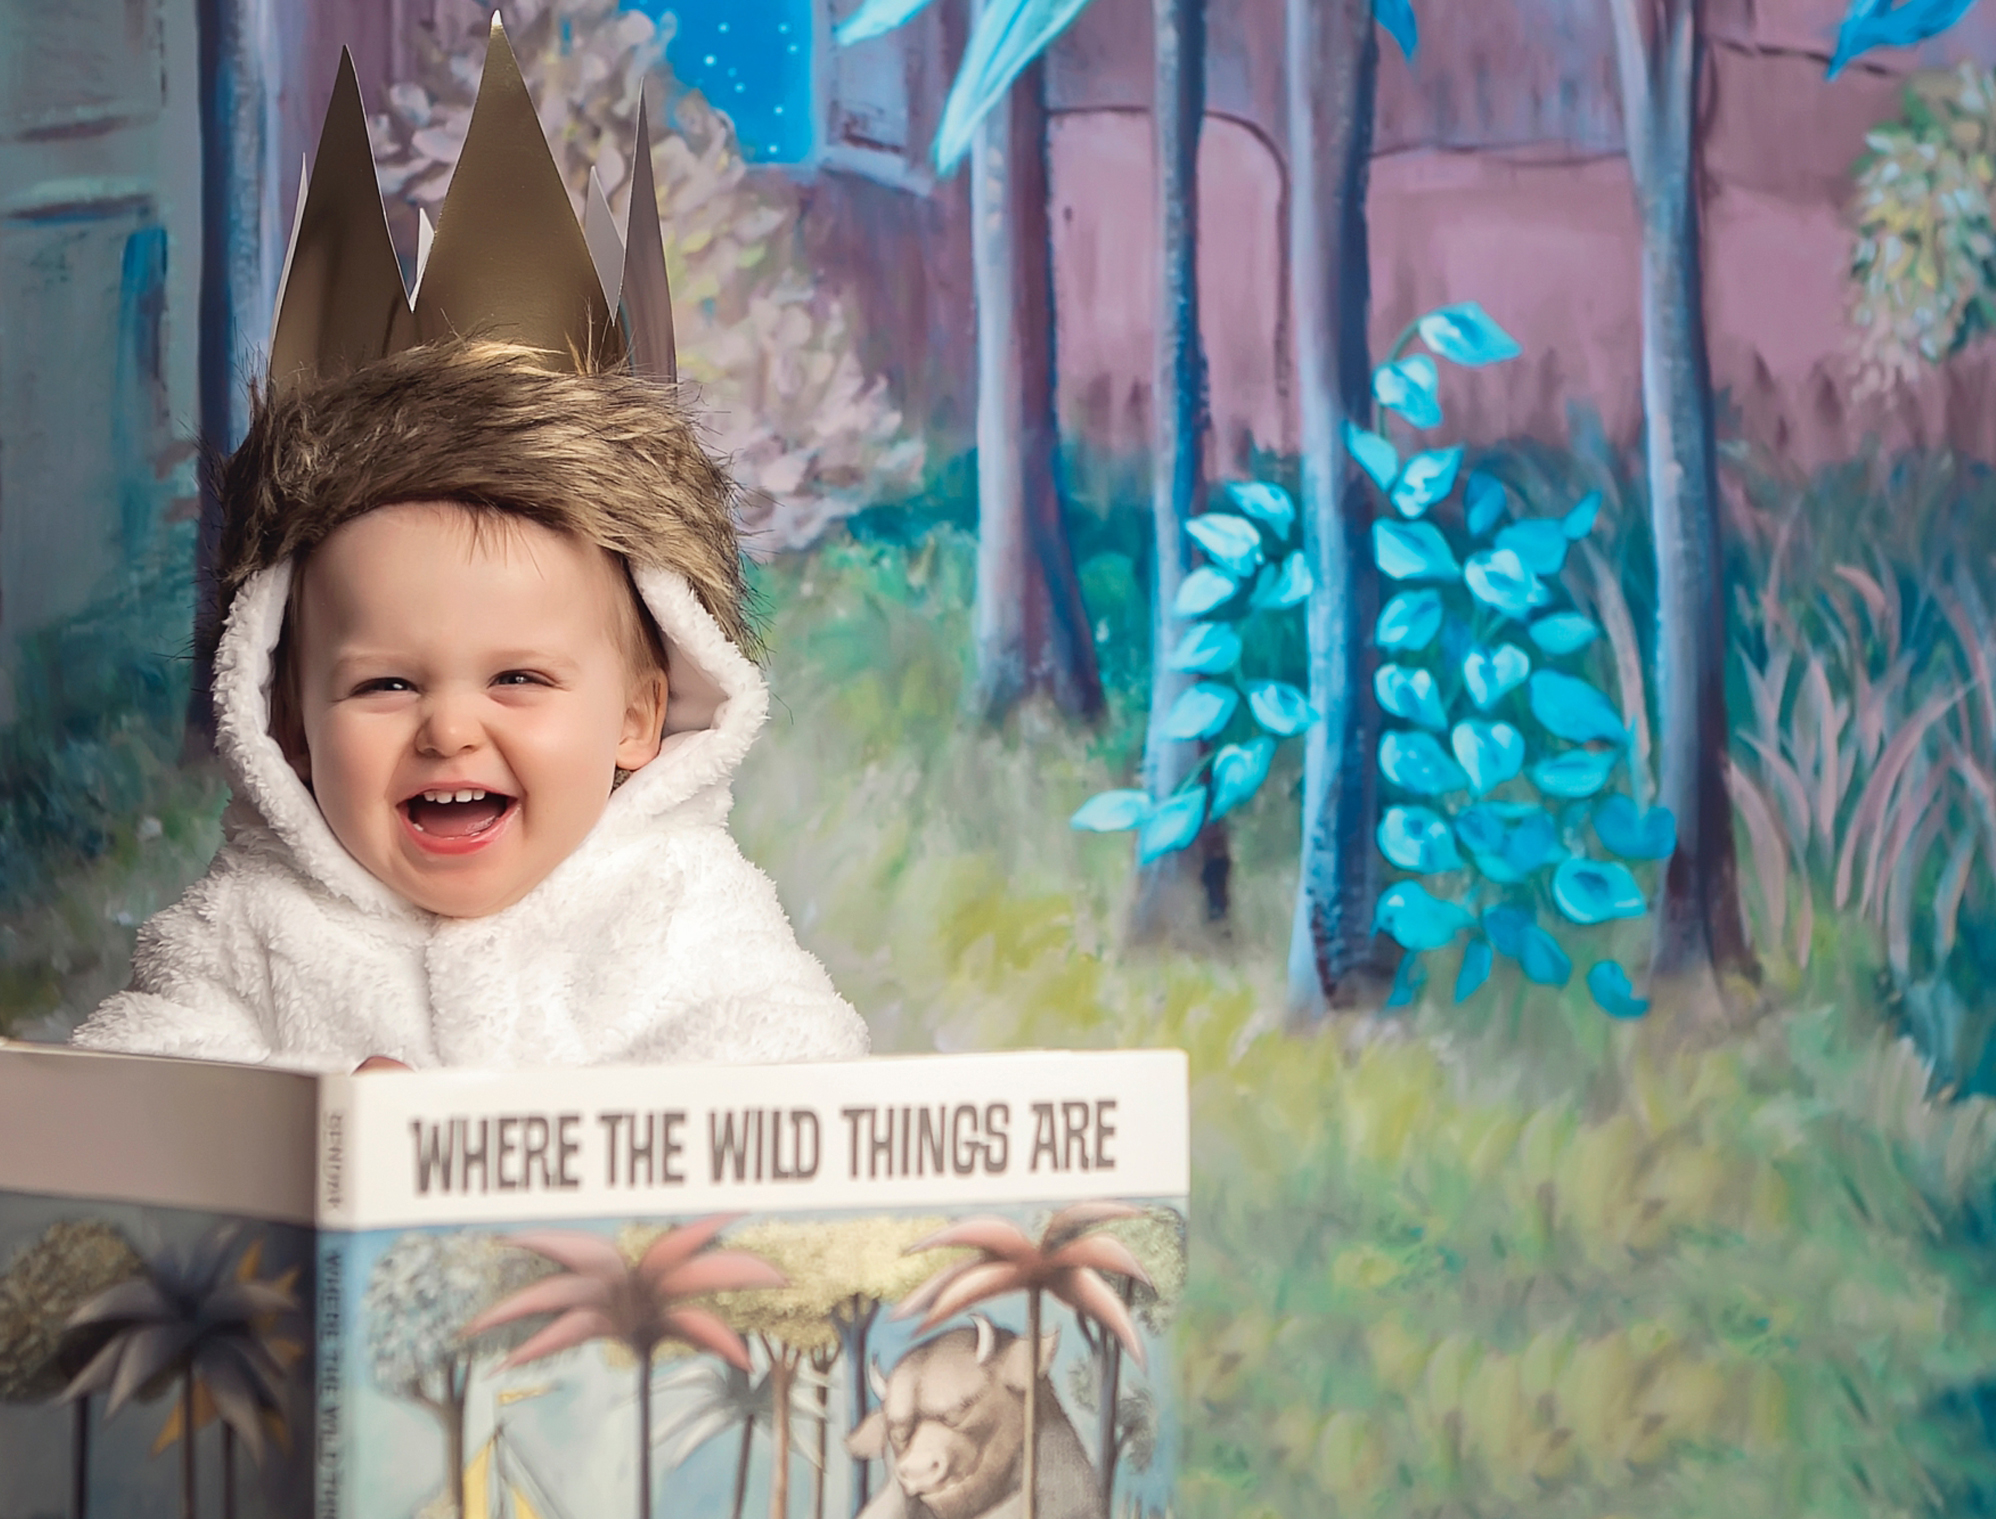 Where the wild things are photo